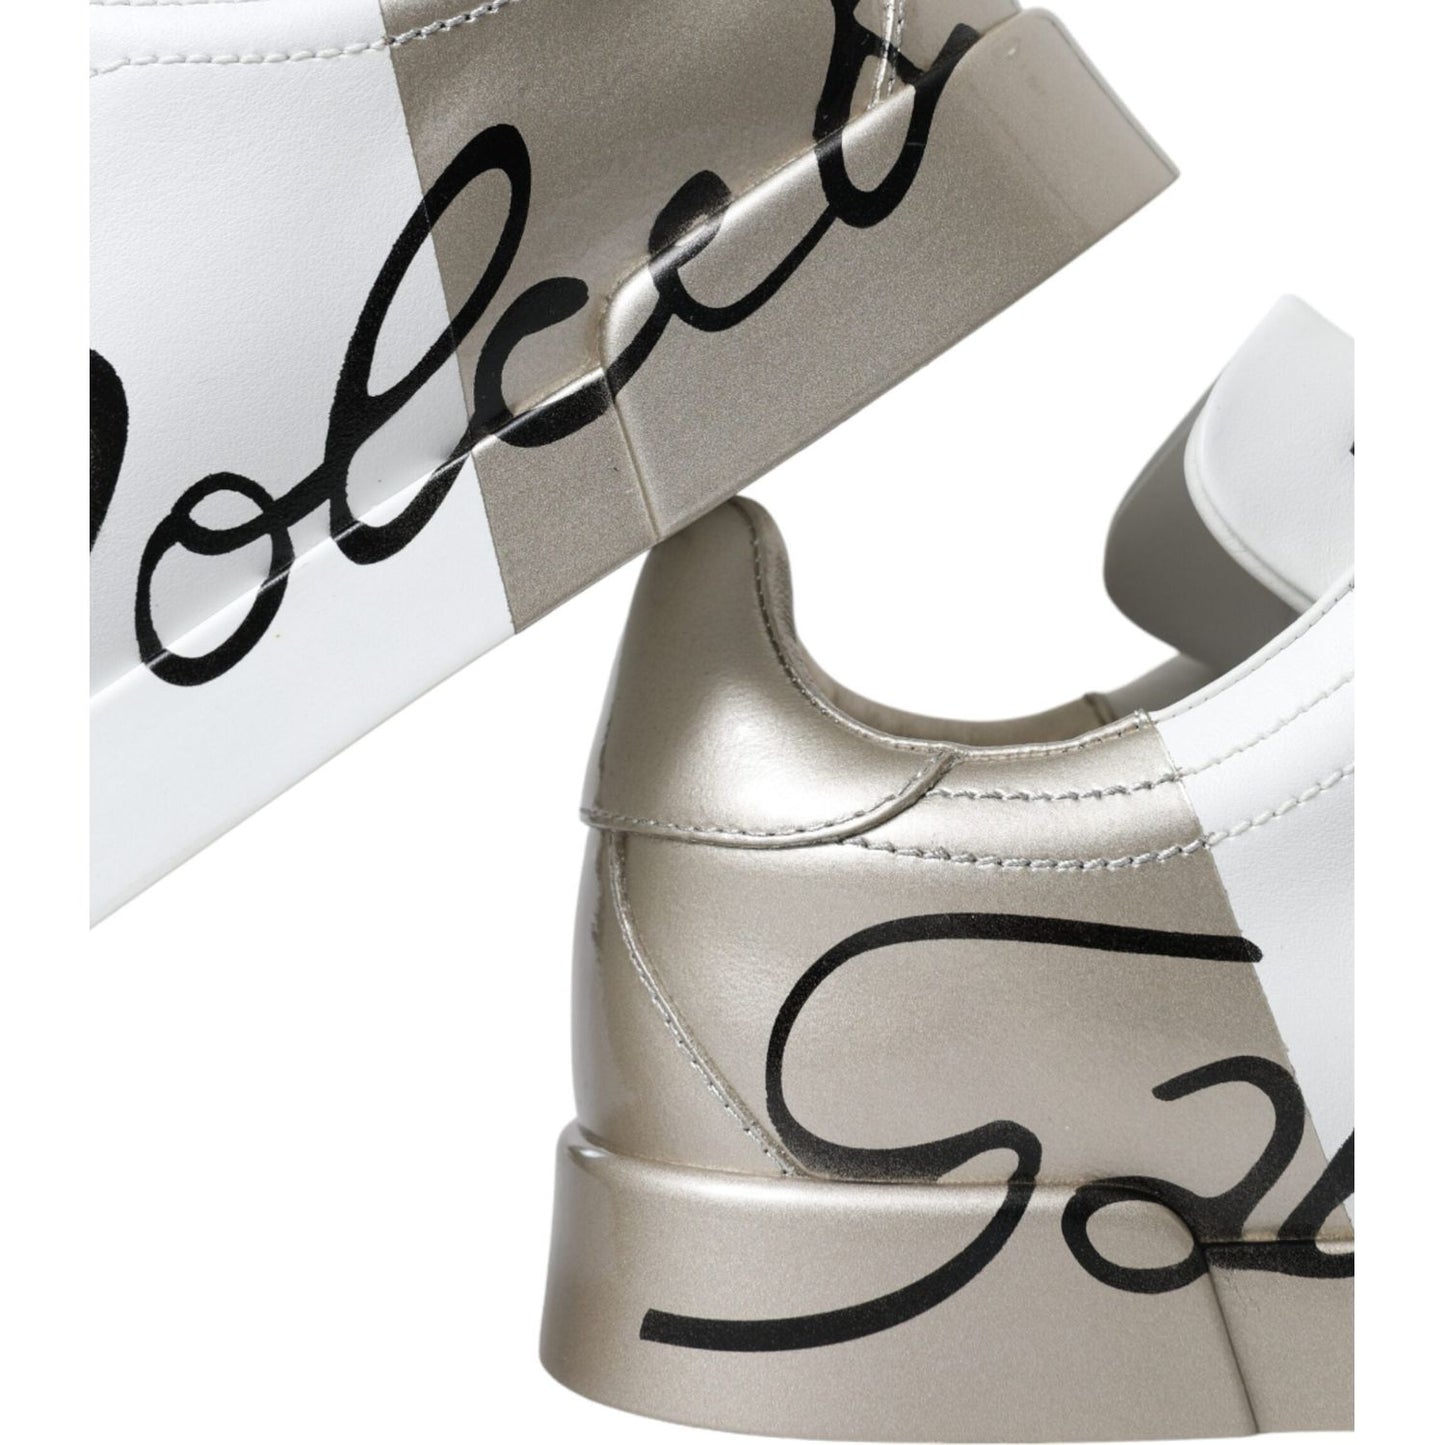 Dolce & Gabbana Elegant White & Gold Leather Sneakers white-gold-lace-up-womens-low-top-sneakers 465A2624-BG-scaled-22cff5bc-6ba.jpg